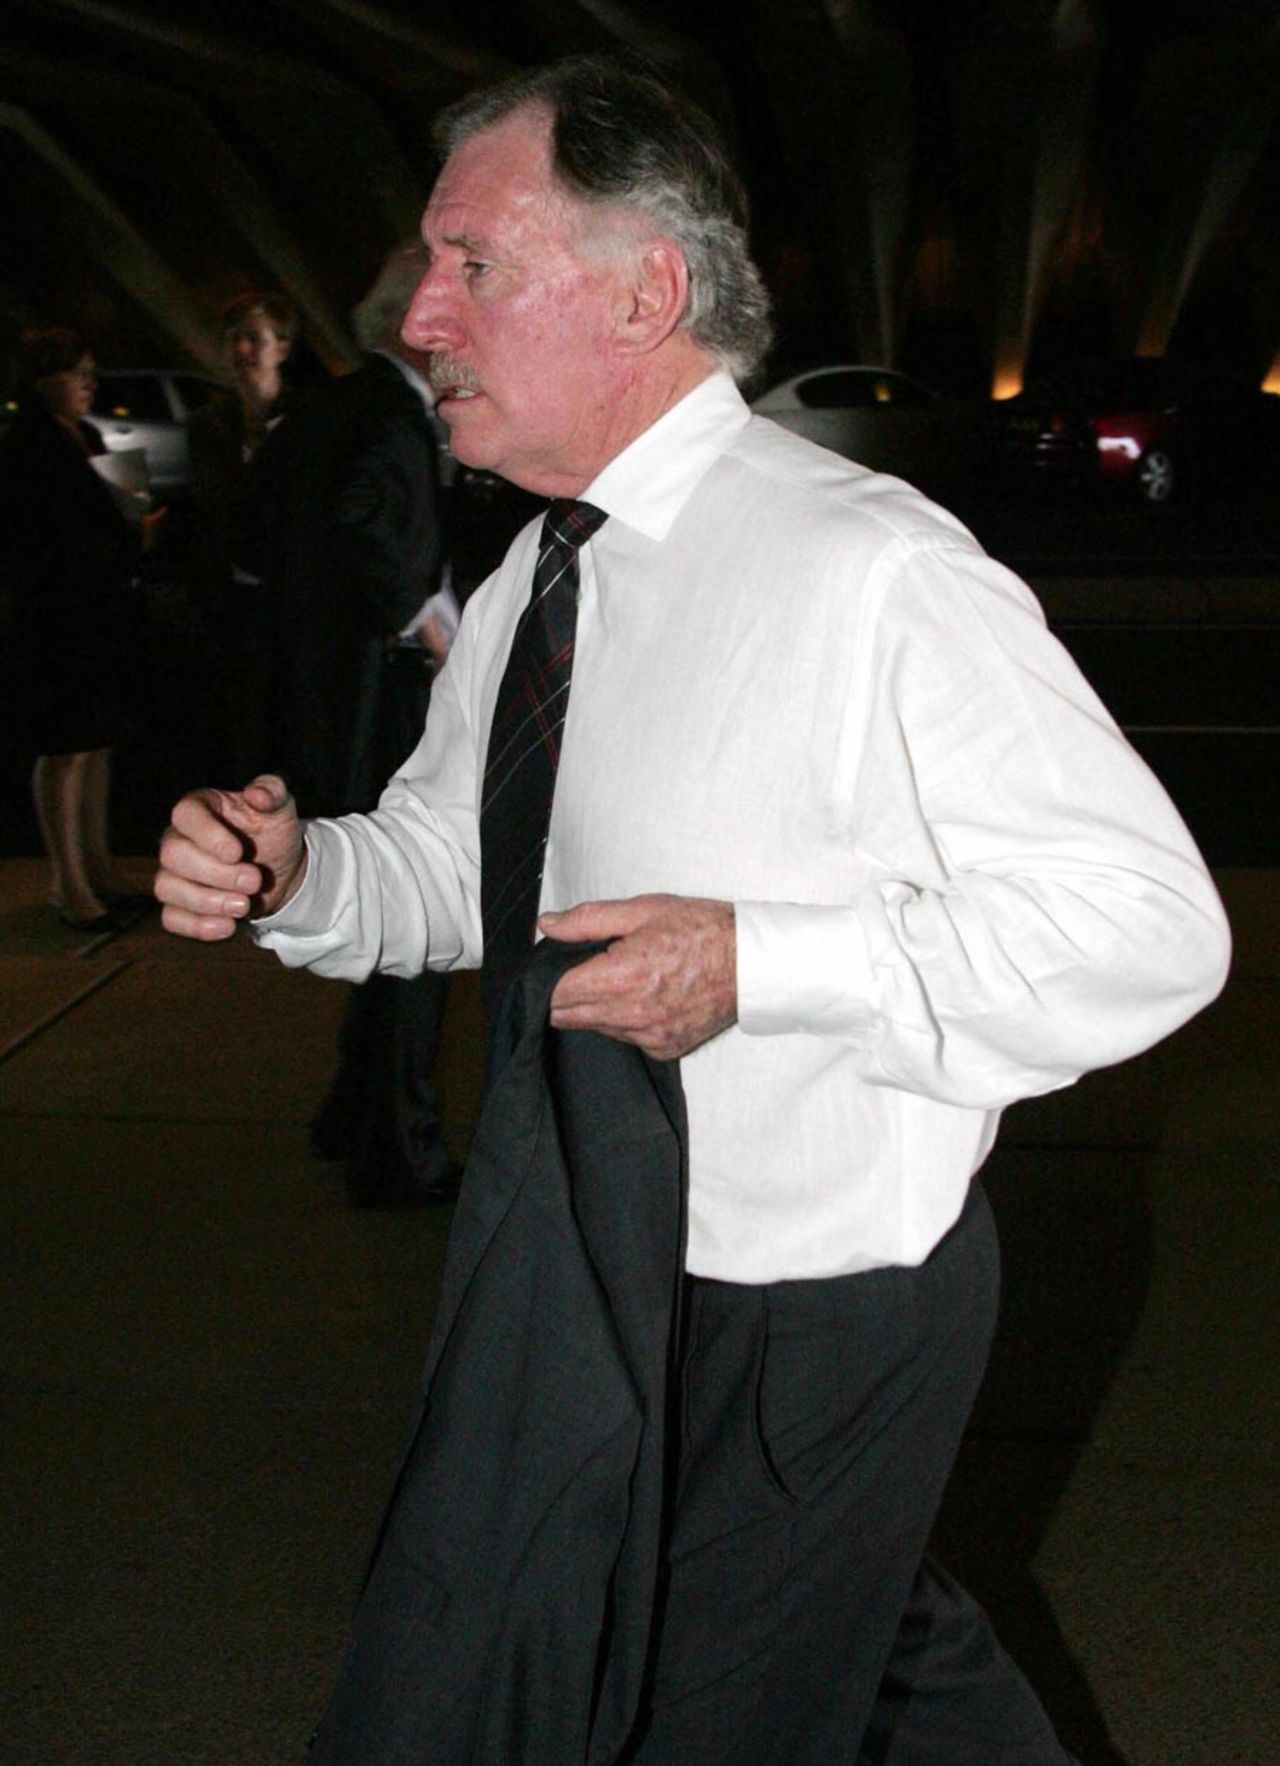 Ian Chappell arrives for the state memorial for Kerry Packer, Sydney, February 17, 2006